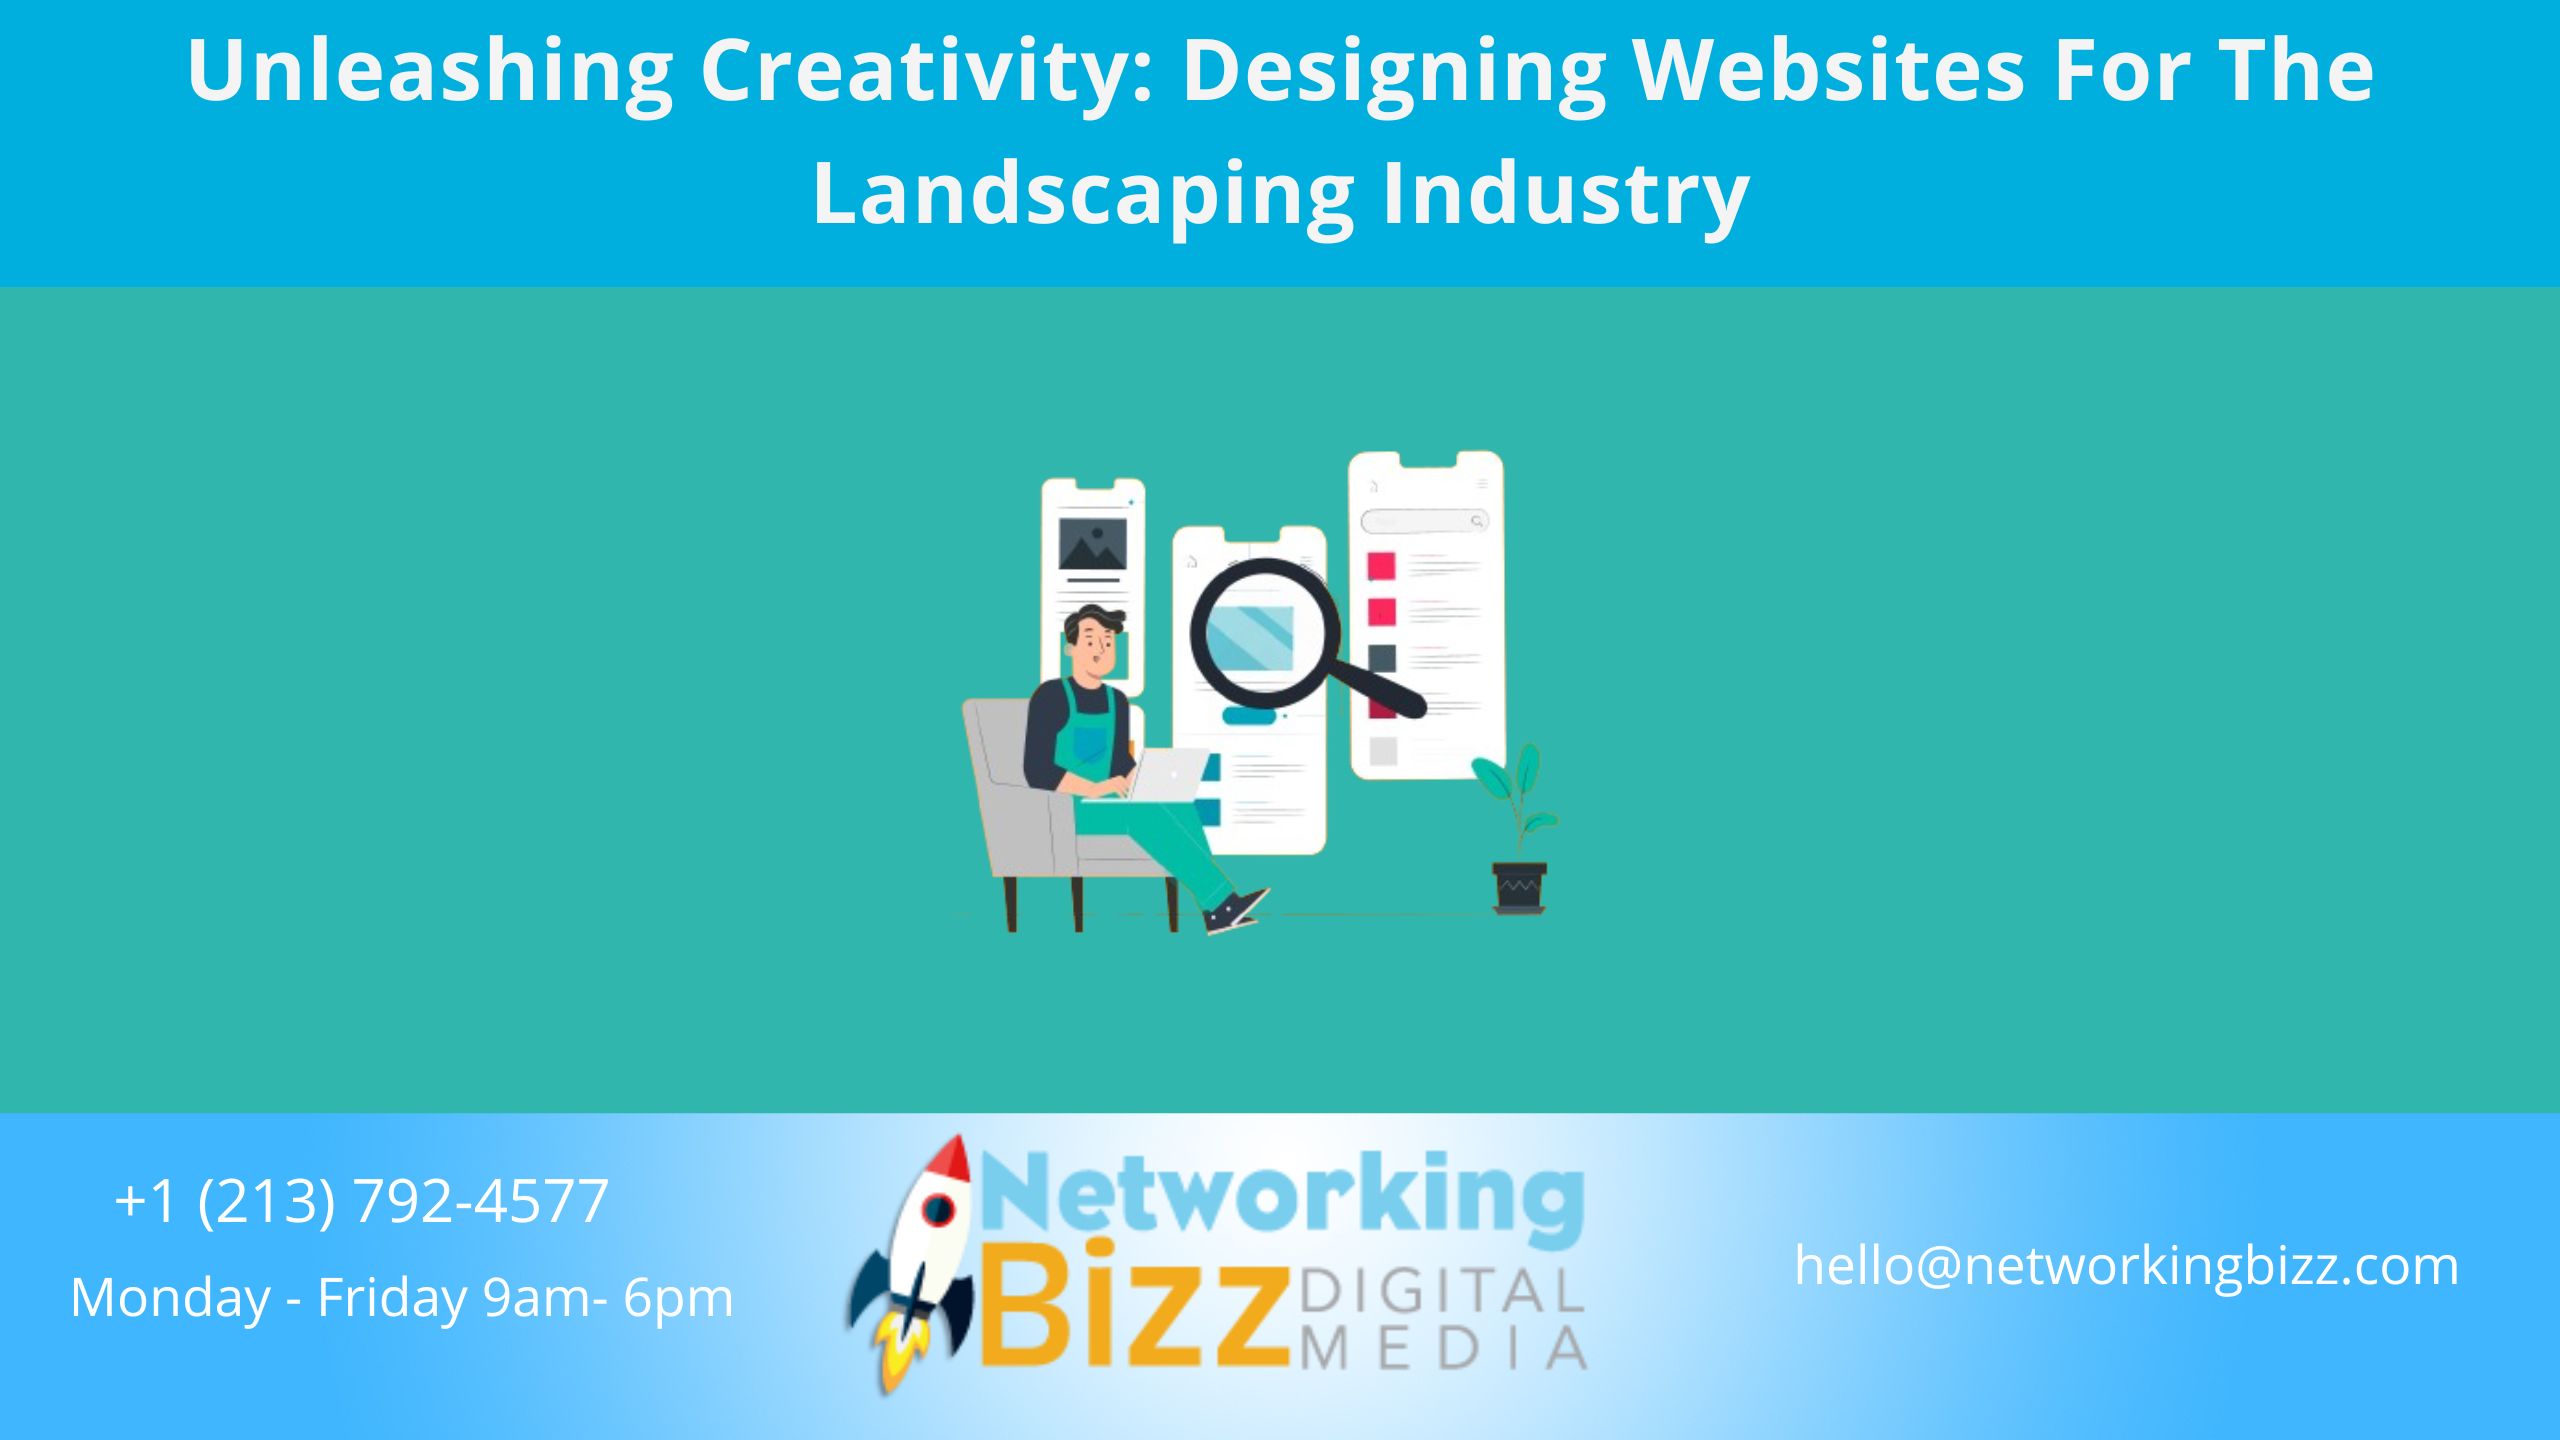 Unleashing Creativity: Designing Websites For The Landscaping Industry